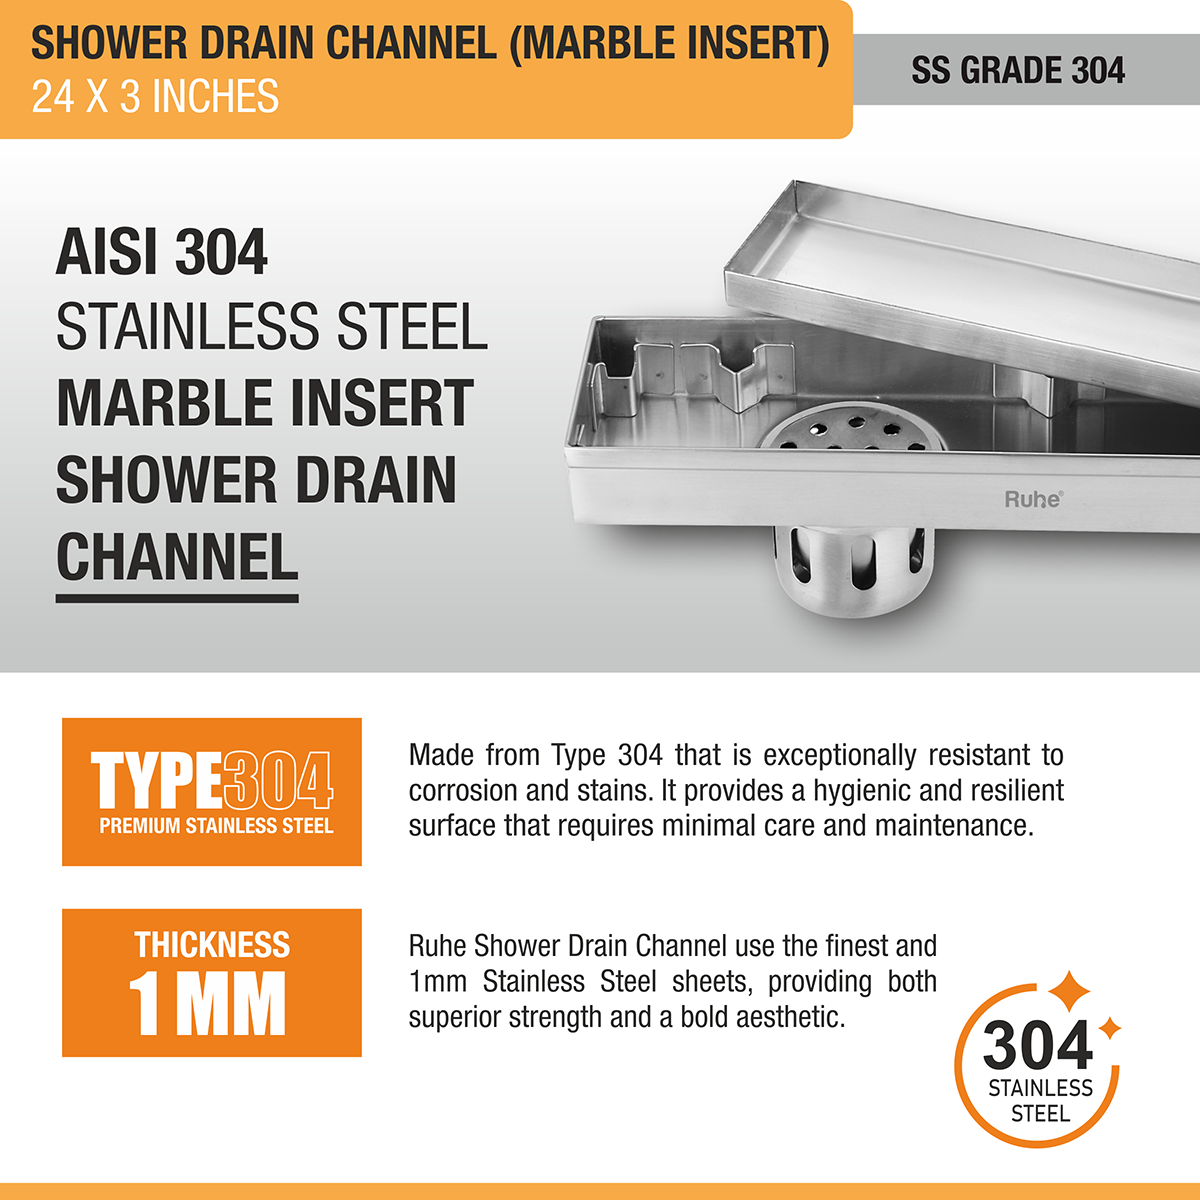 Marble Insert Shower Drain Channel (24 x 3 Inches) with Cockroach Trap (304 Grade) stainless steel